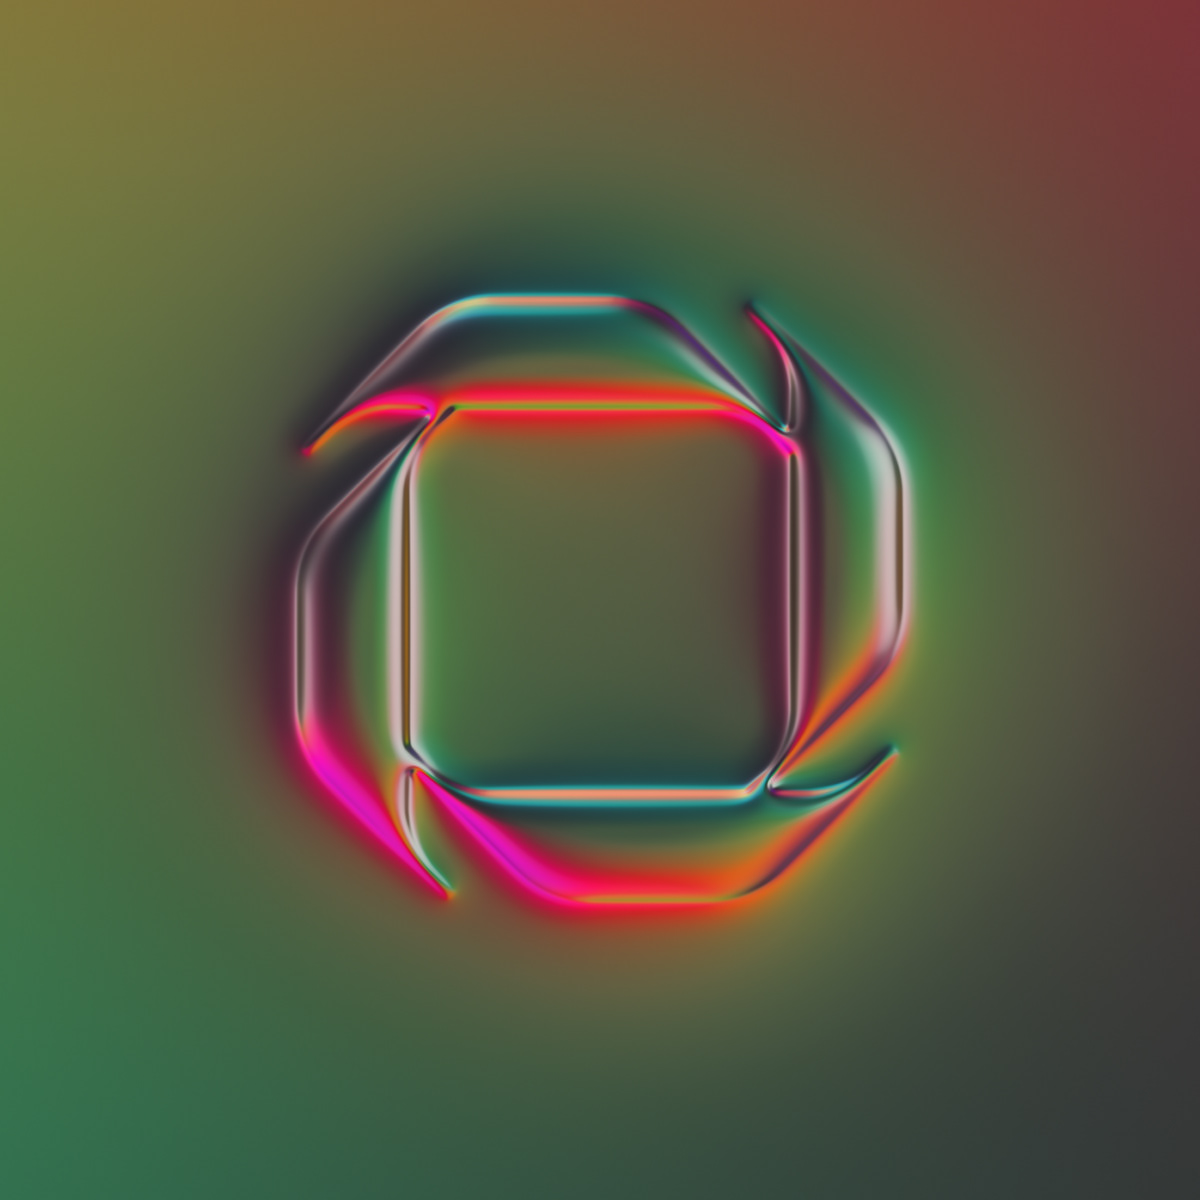 36 days 36daysoftype lettering typography   chrome glass metallic reflection refraction type design